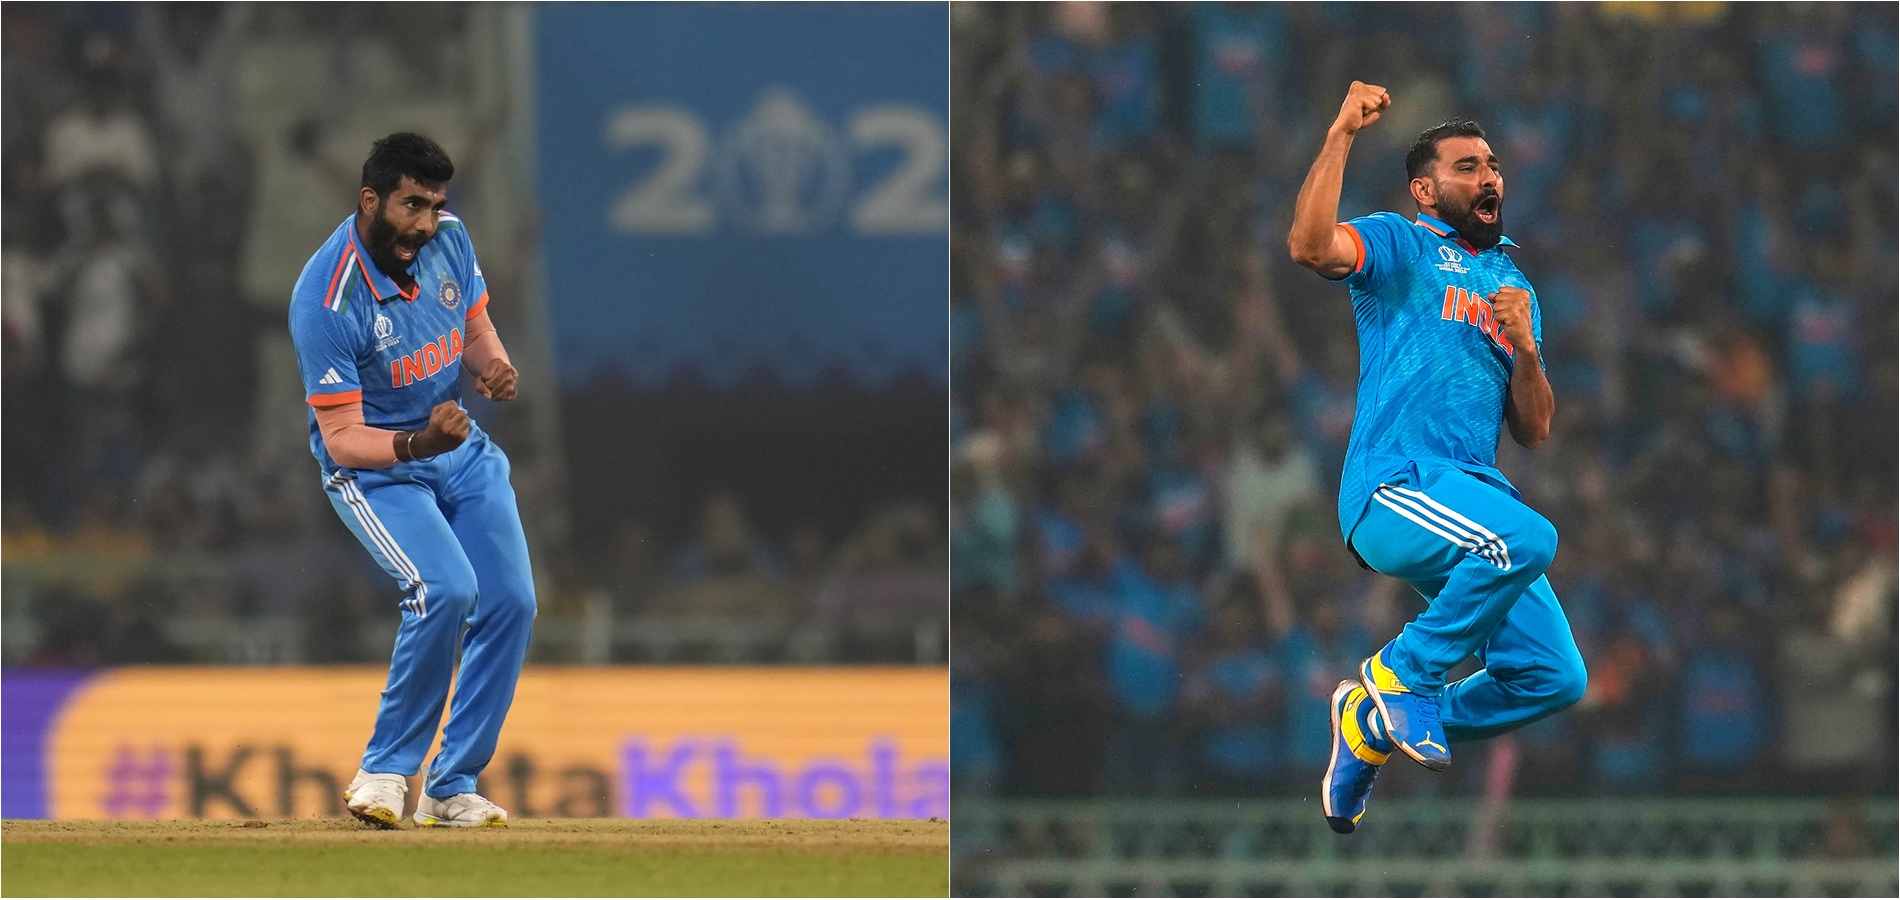 Cricket World Cup: Jasprit Bumrah & Mohammed Shami add their names to list including Lillee-Thomson, Wasim-Waqar, Ambrose-Walsh, Anderson-Broad with demolition job on England top order